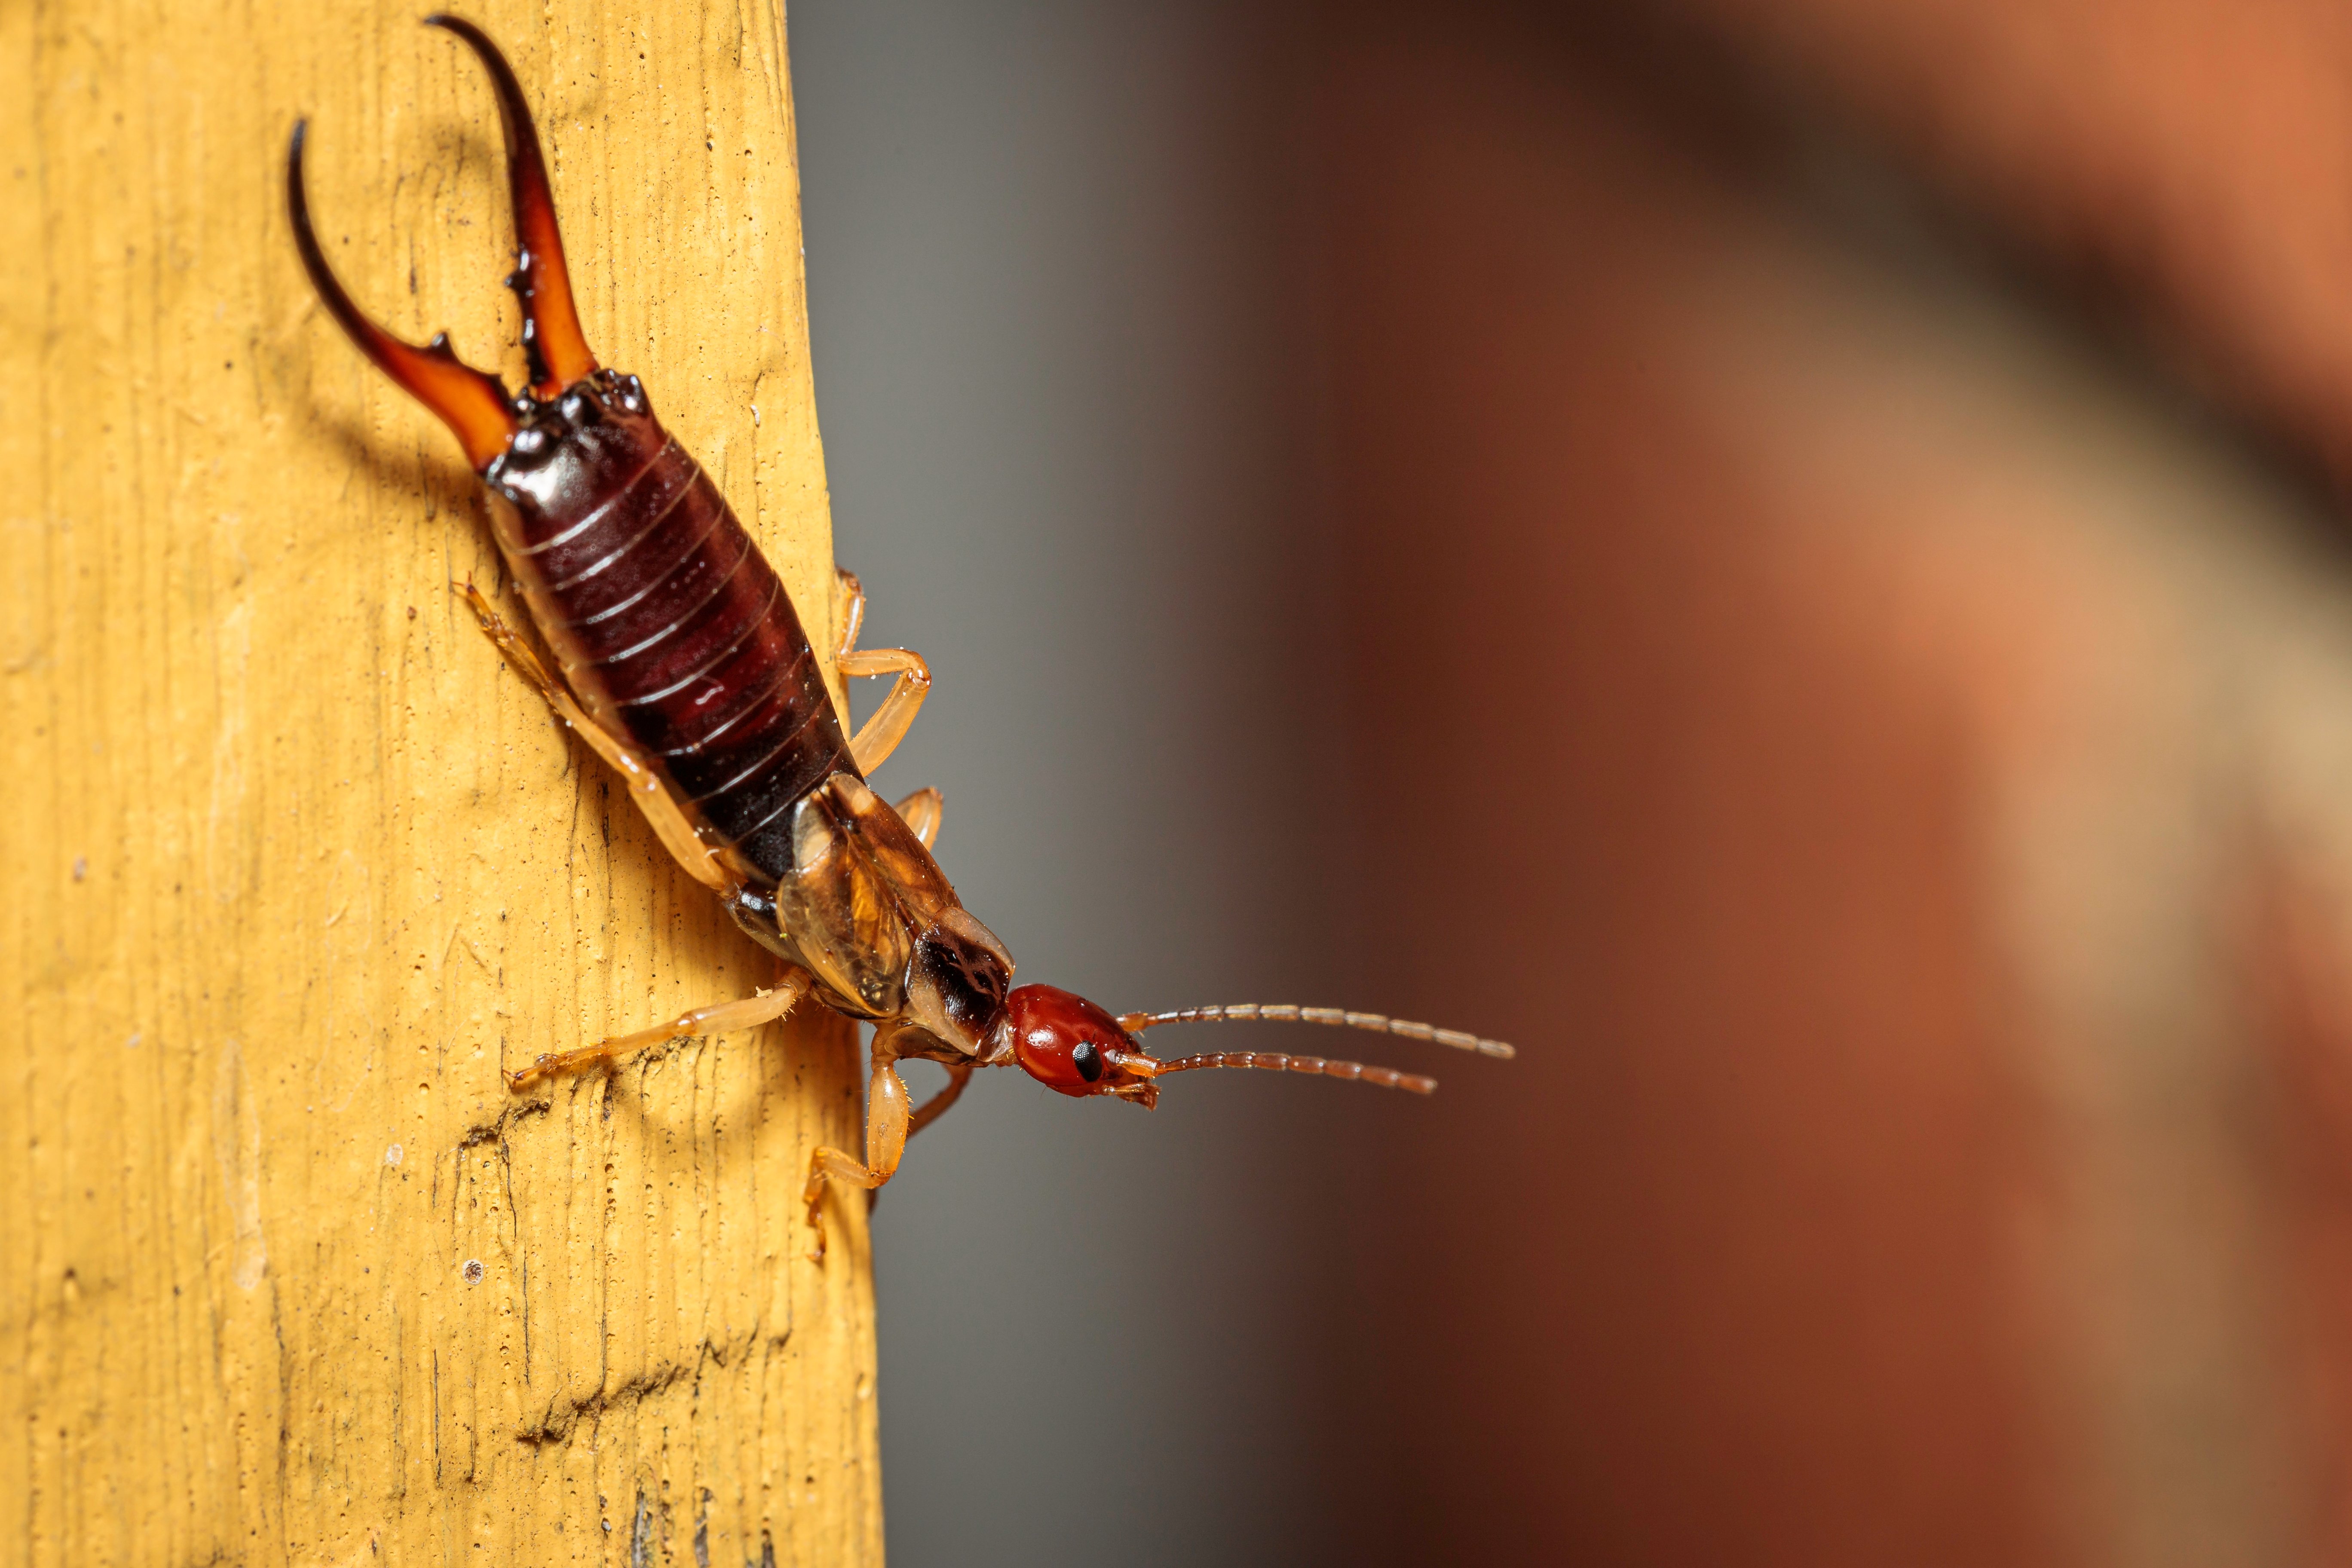 Earwig, also known as pincher bug, standing on wood column inside a home.